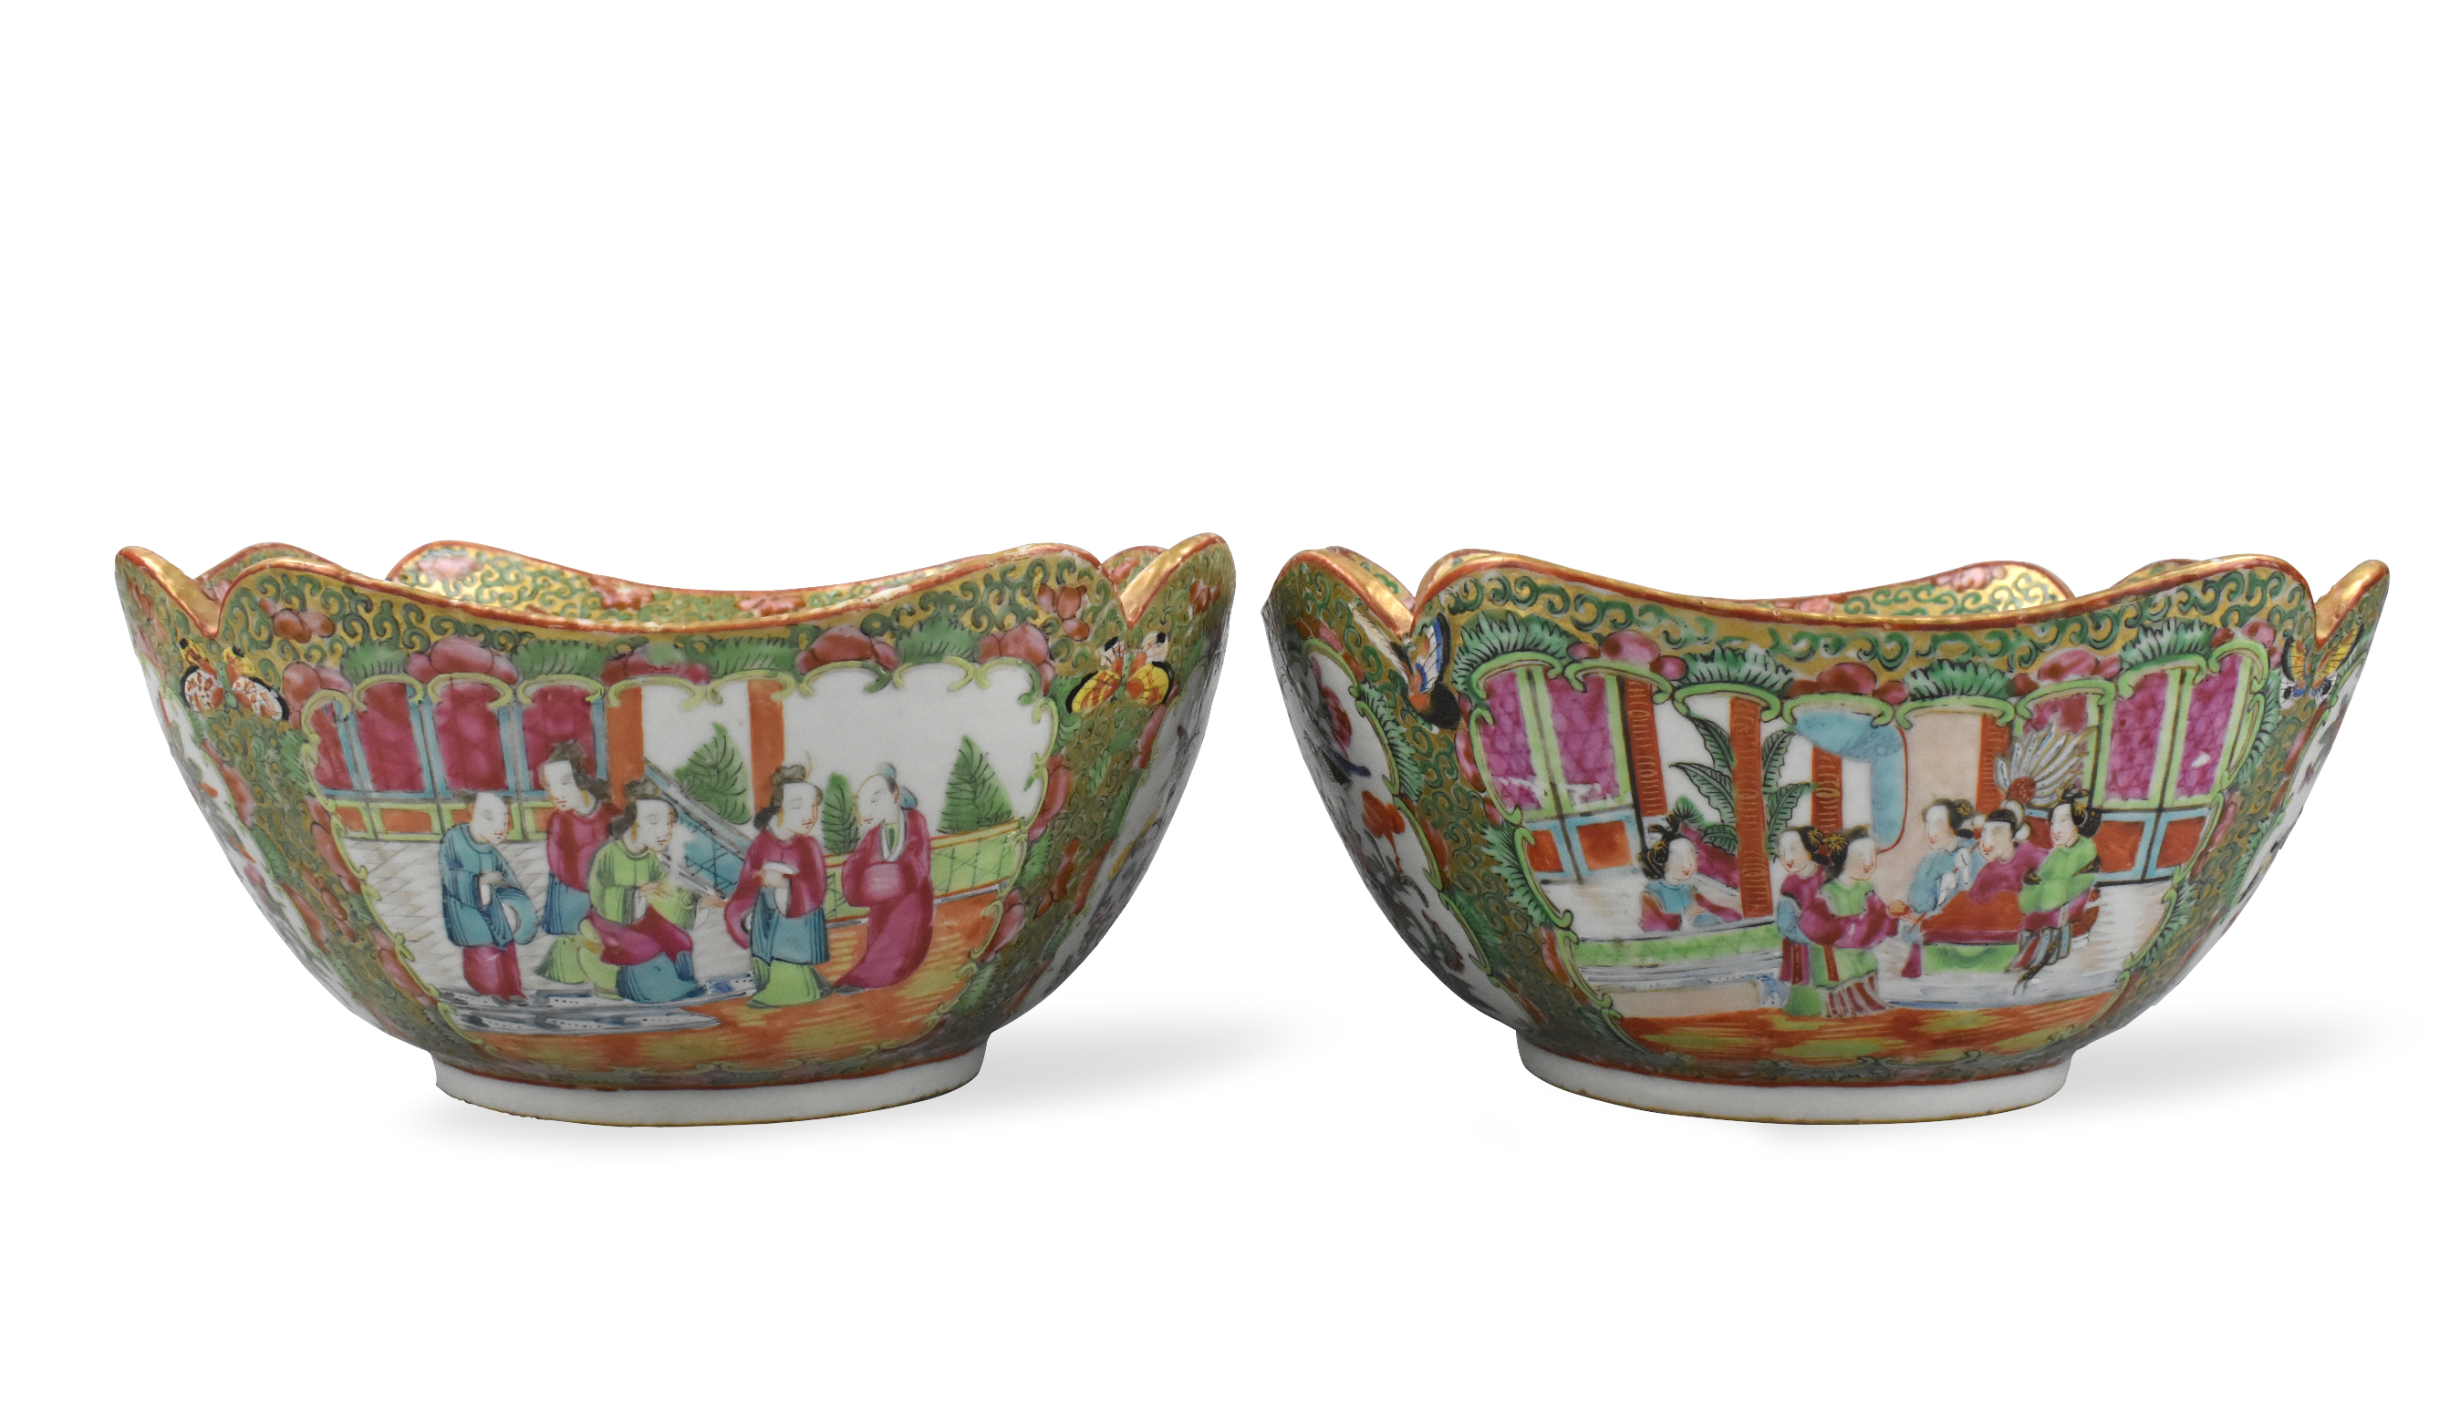 PAIR OF CHINESE CANTON GLAZED BOWLS  339c8f